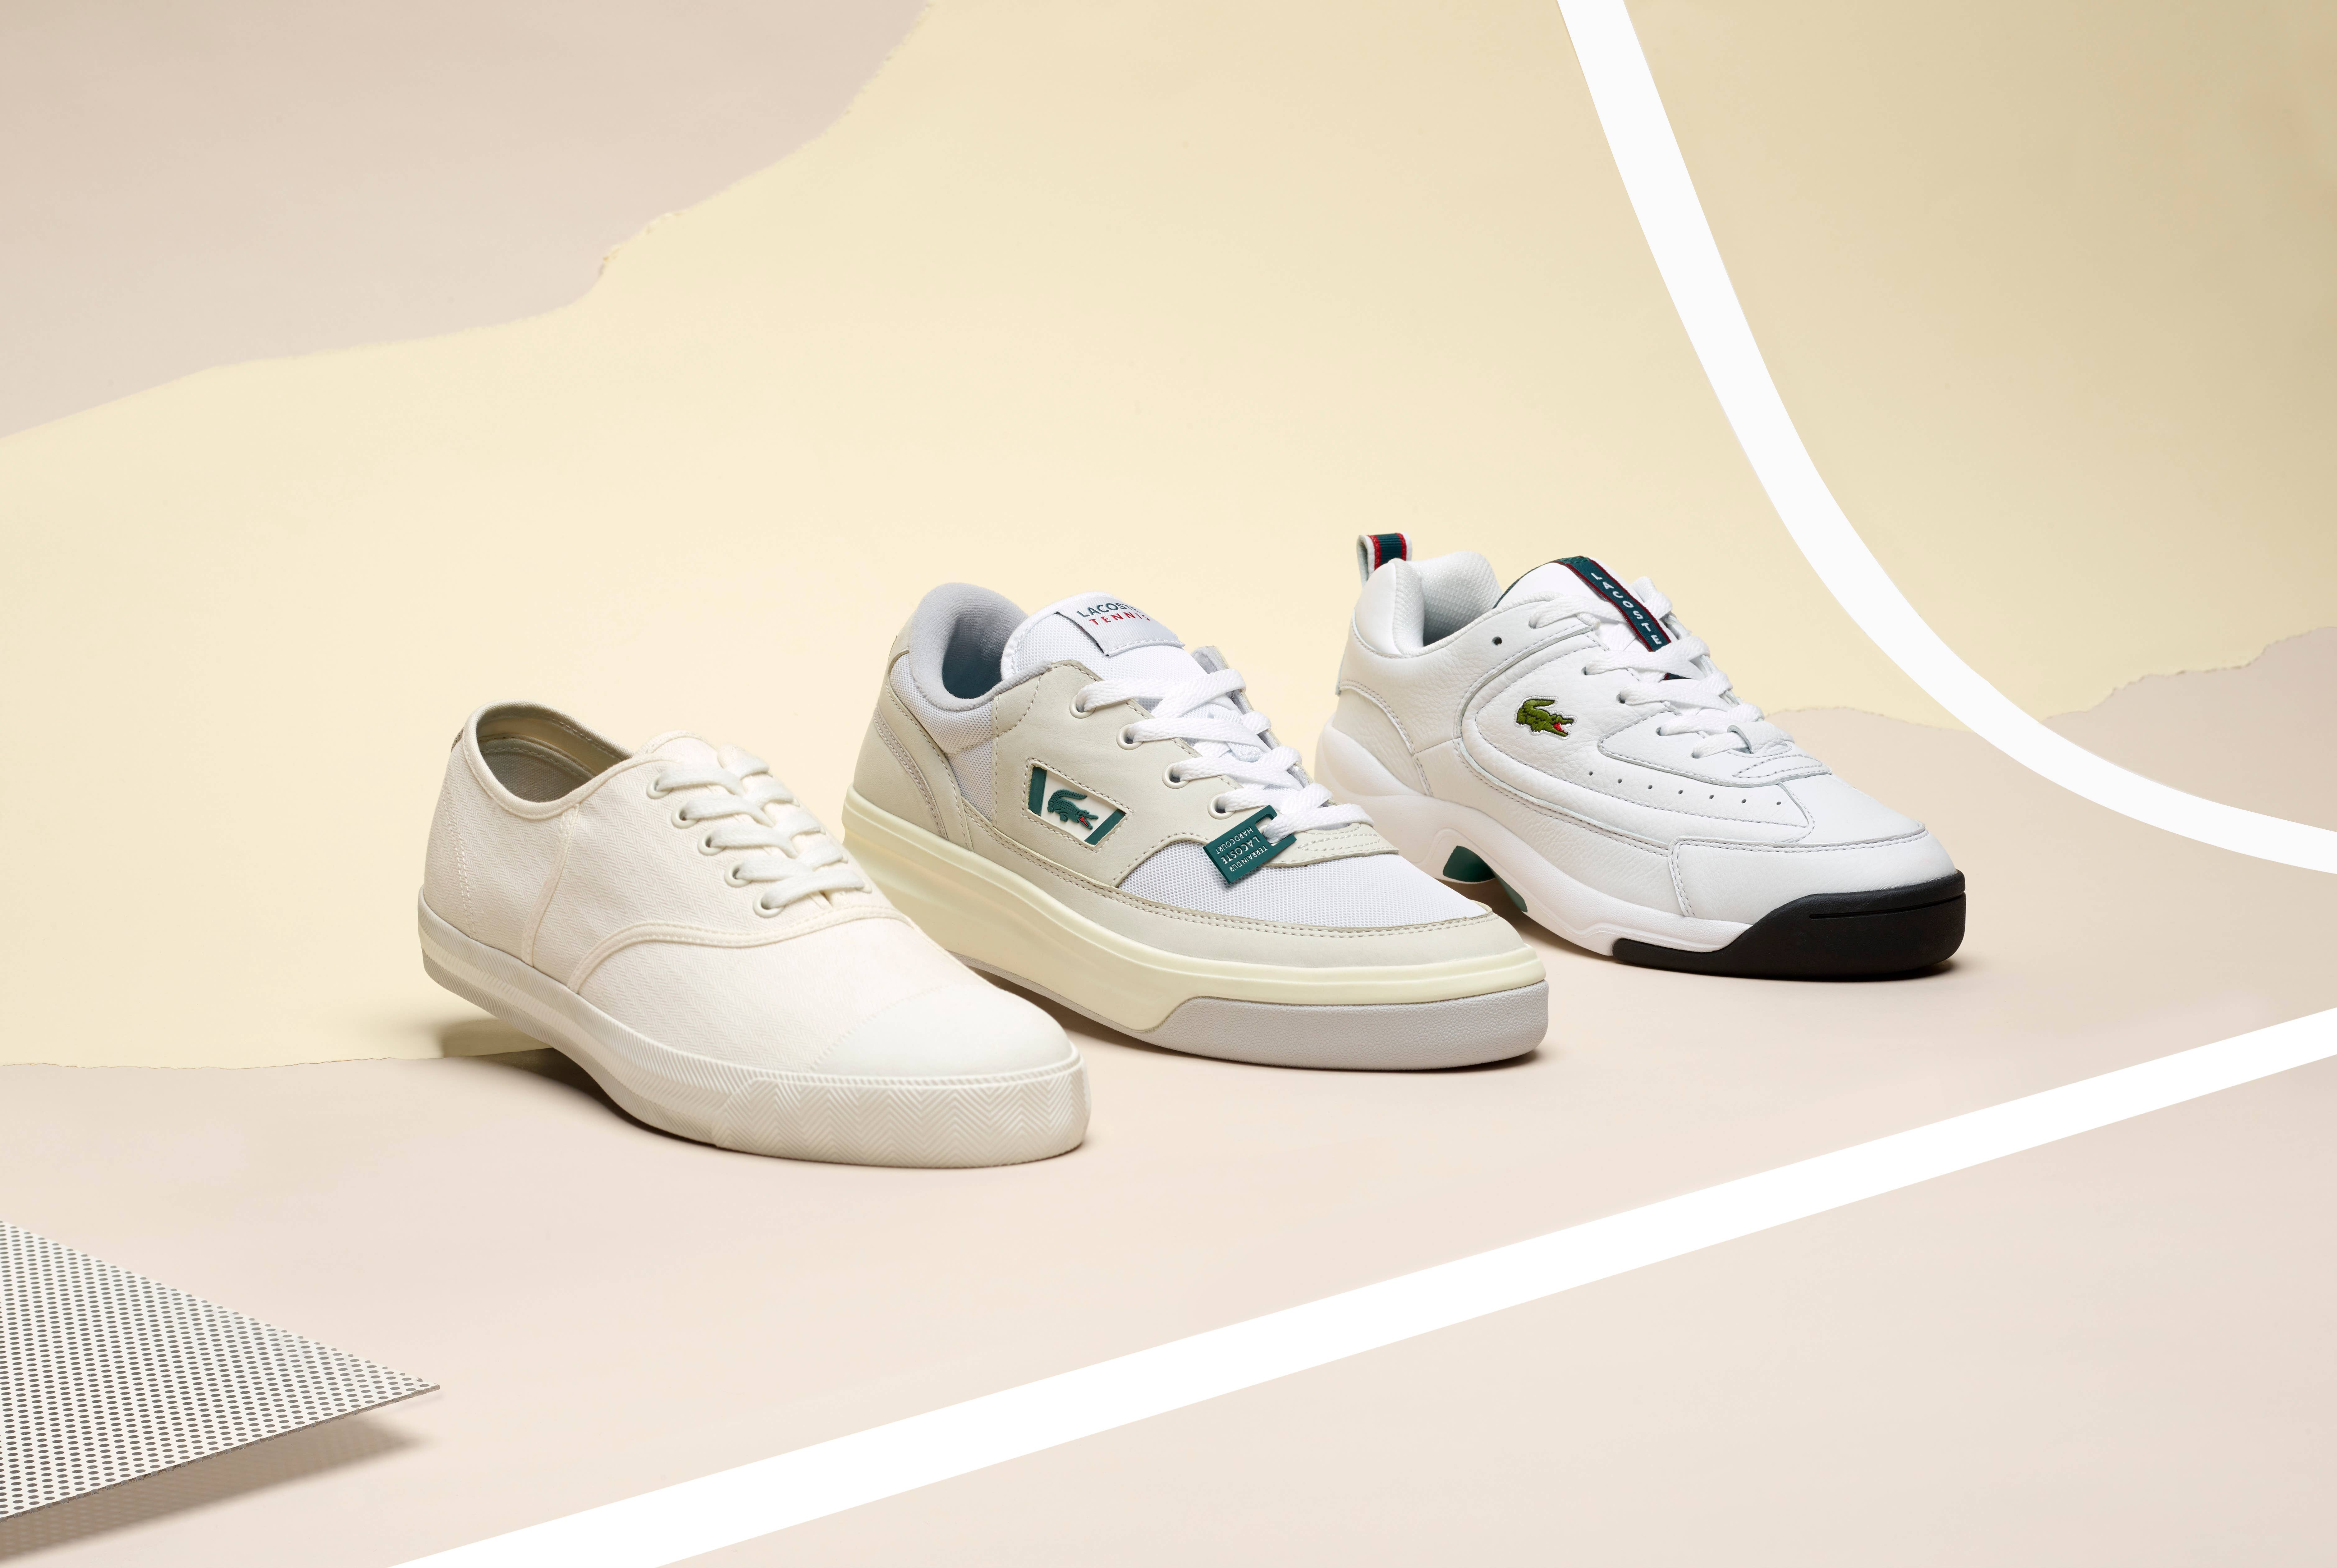 LACOSTE's Heritage Reissues a Three-Peat of Classic Silhouettes |